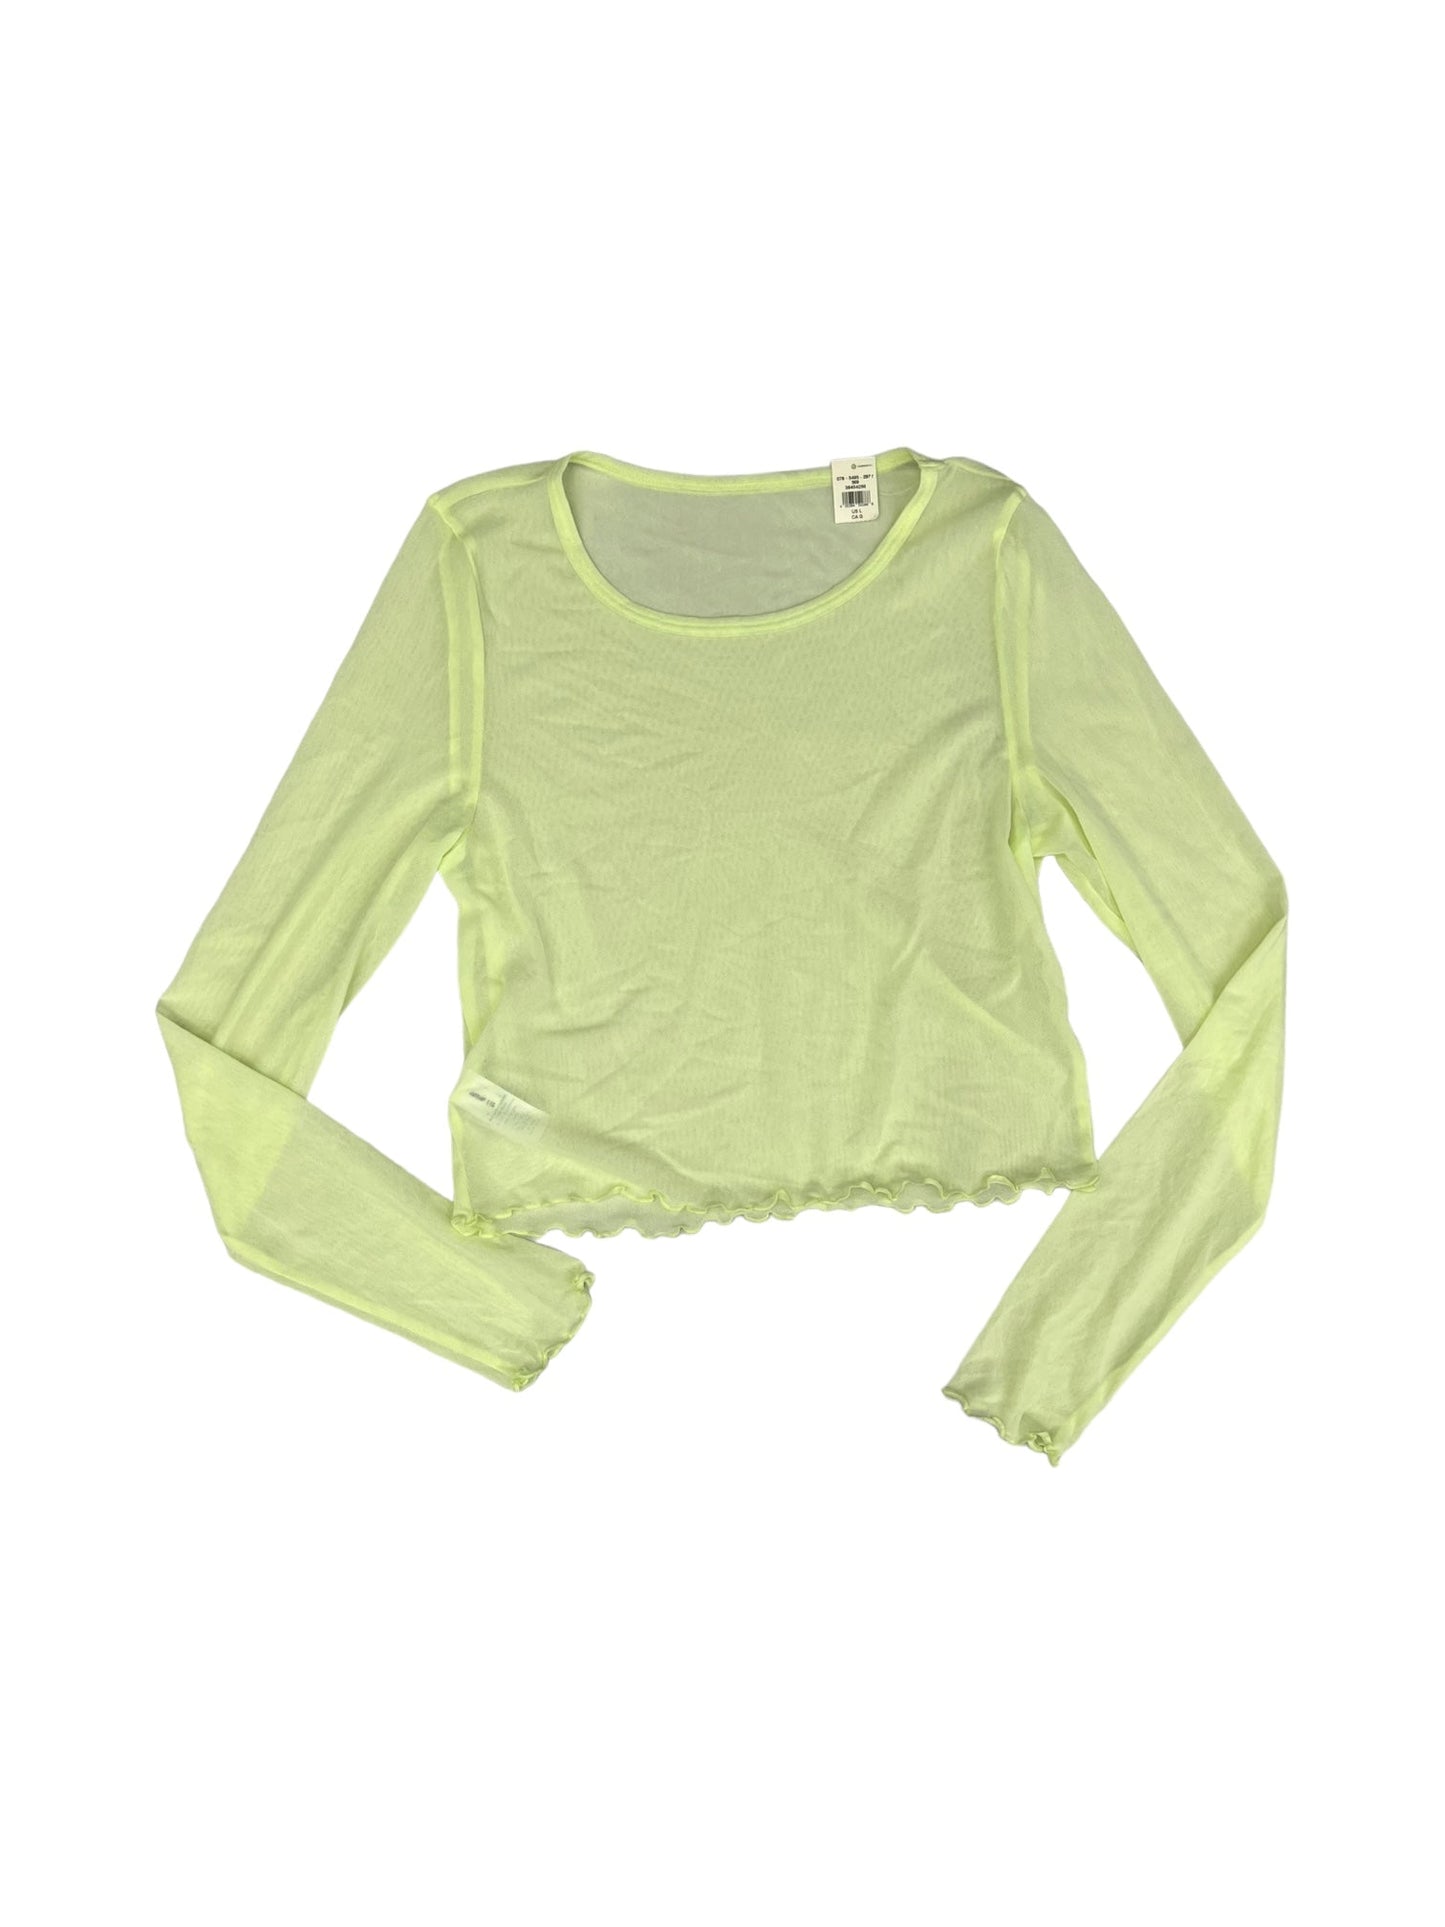 Green Top Long Sleeve Aerie, Size L